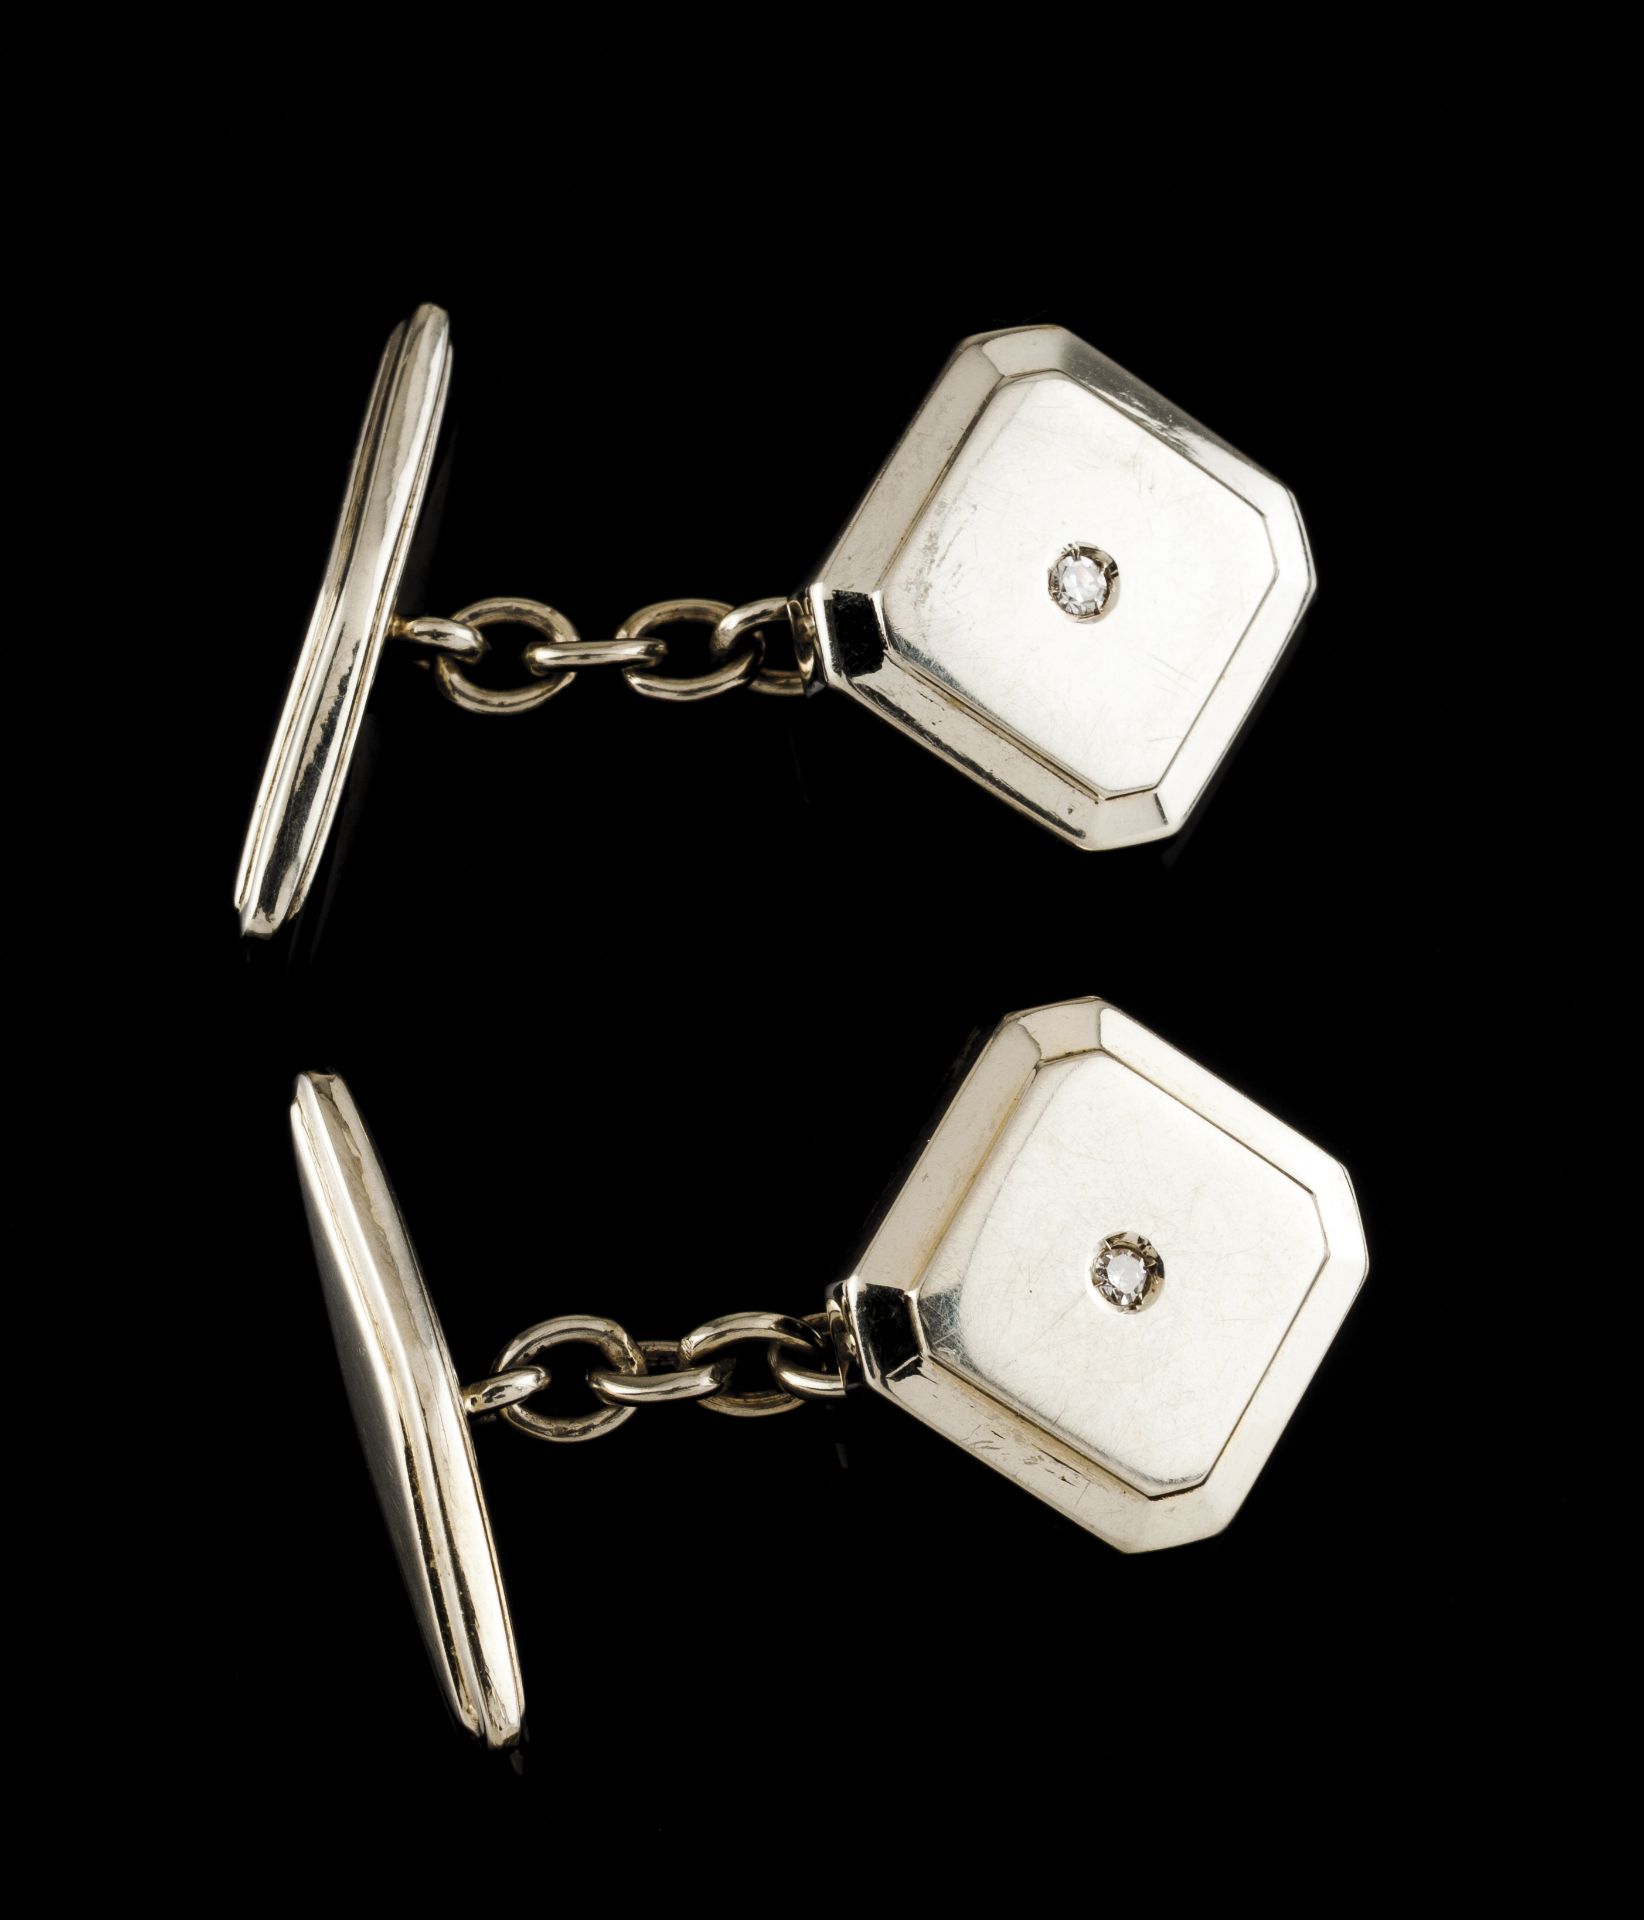 A pair of cufflinksPortuguese goldPlain square shaped of cut corners set with two 8/8 cut